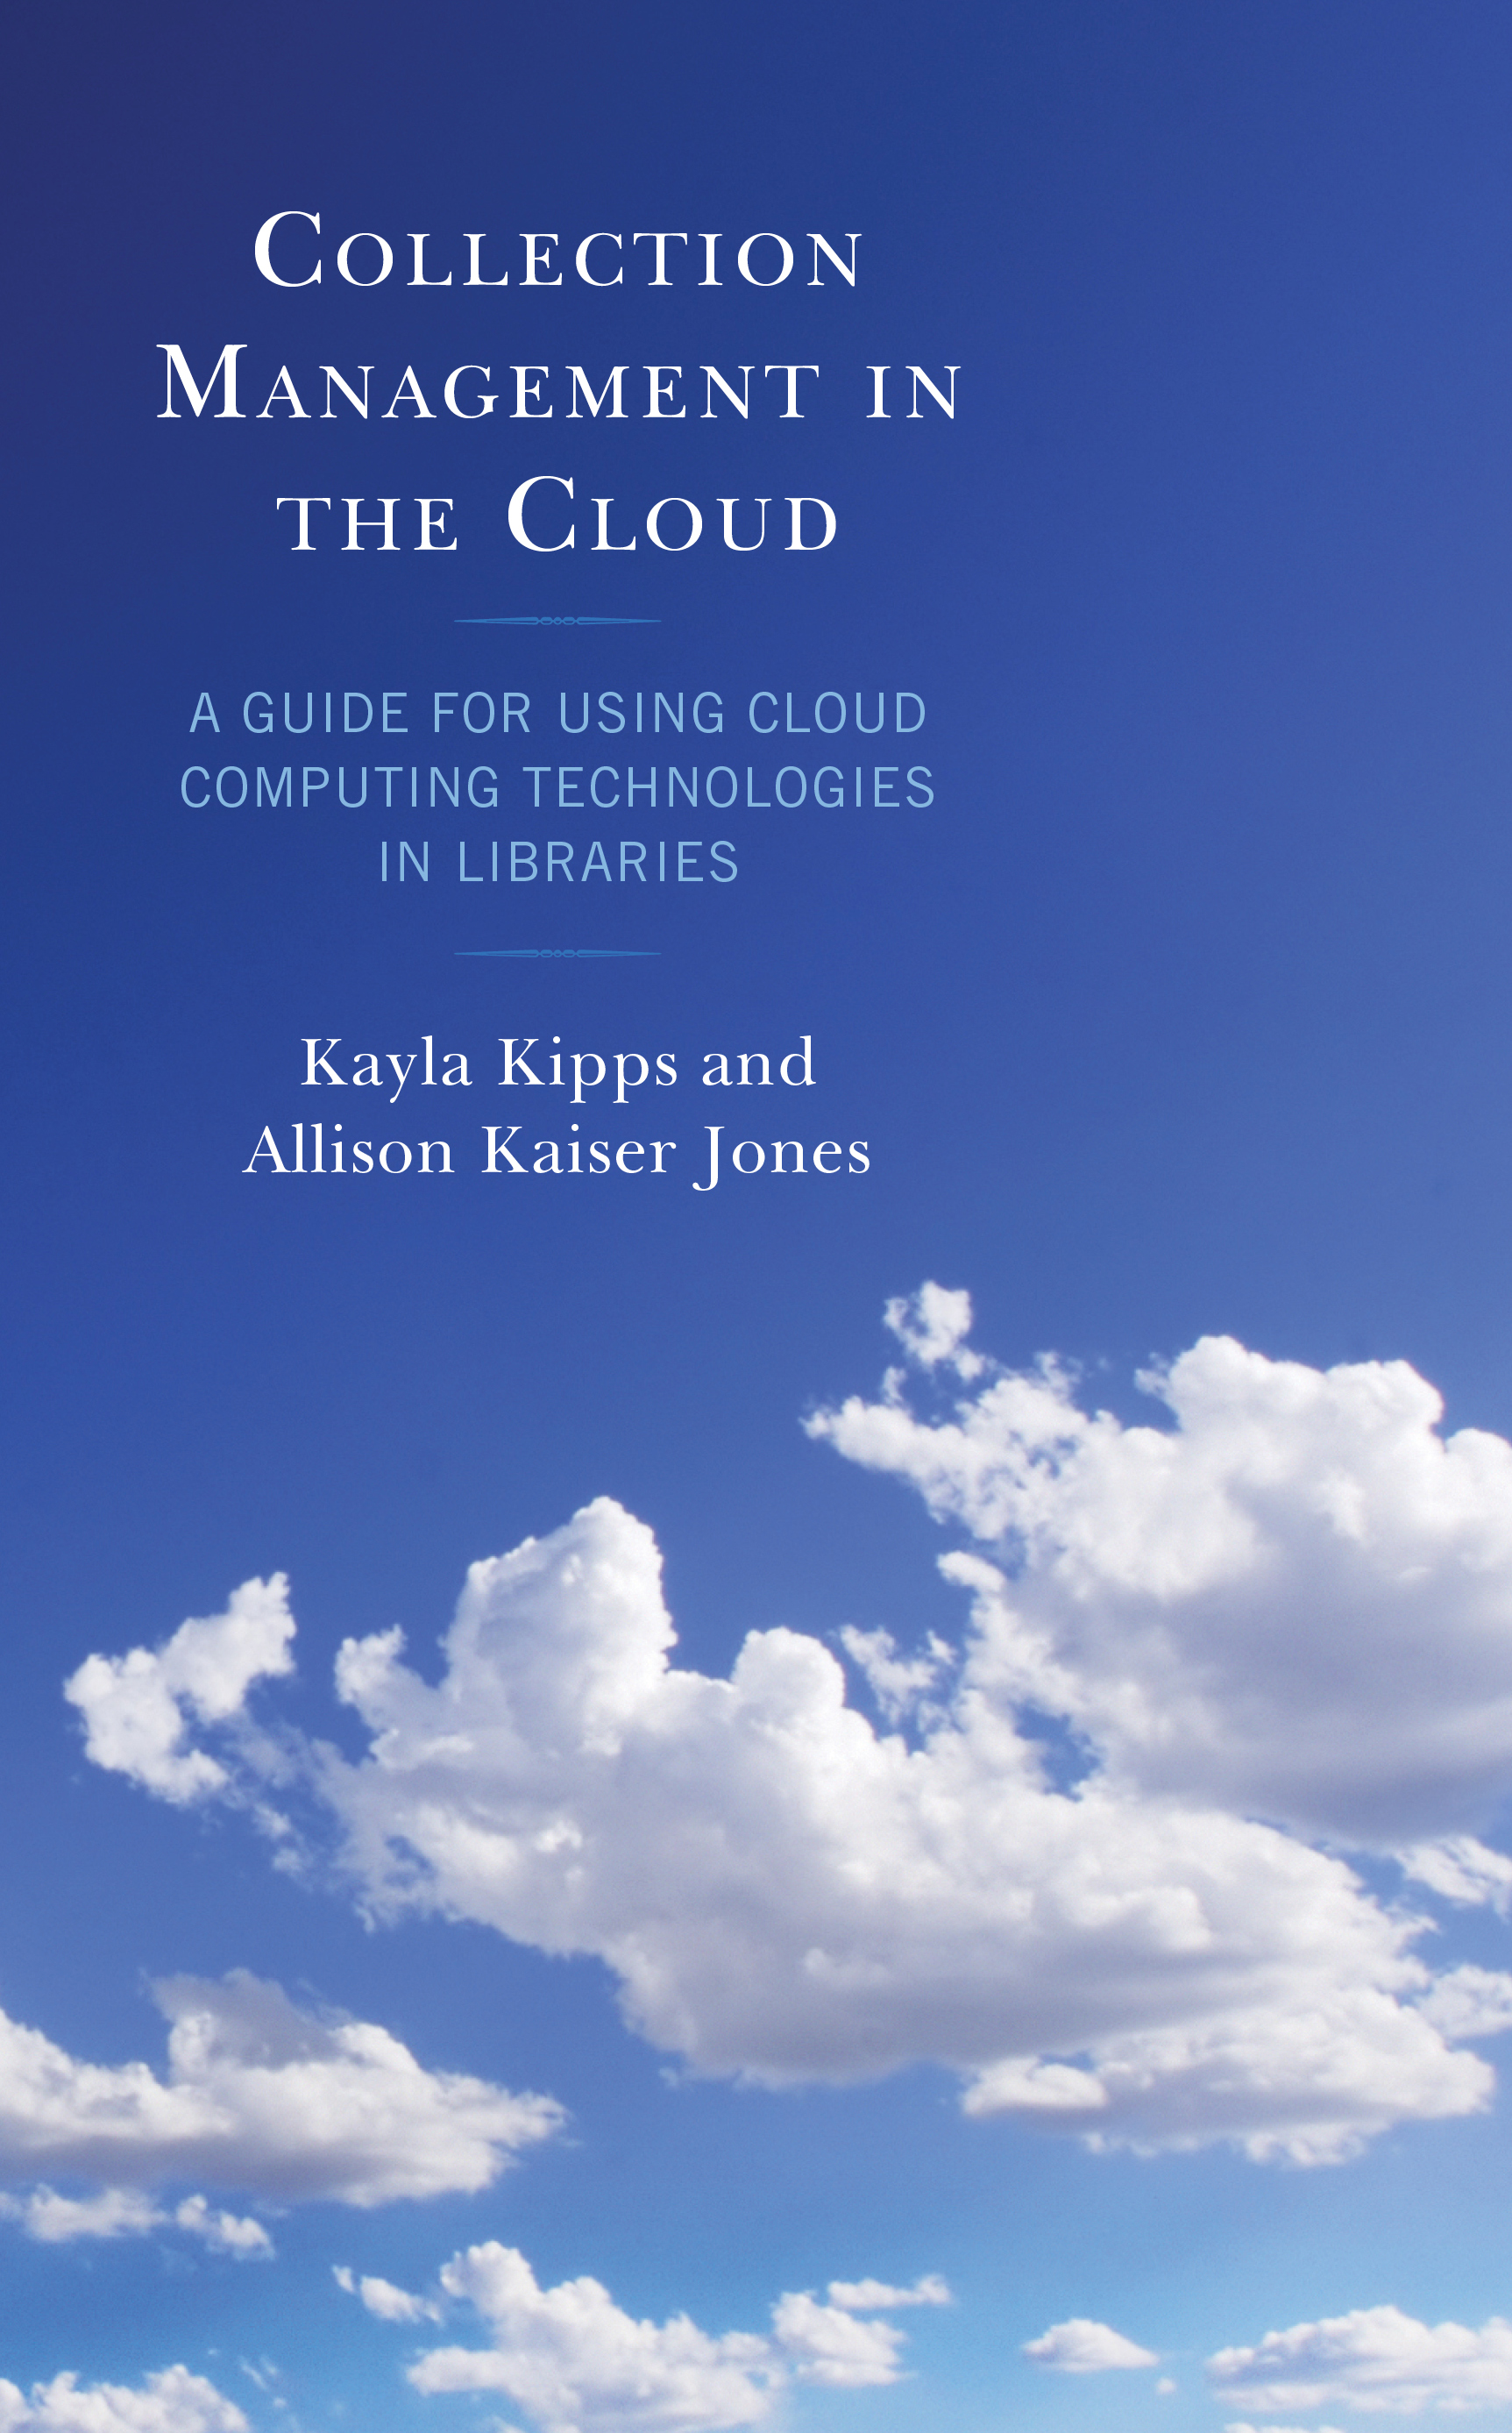 Collection Management in the Cloud: A Guide for Using Cloud Computing Technologies in Libraries